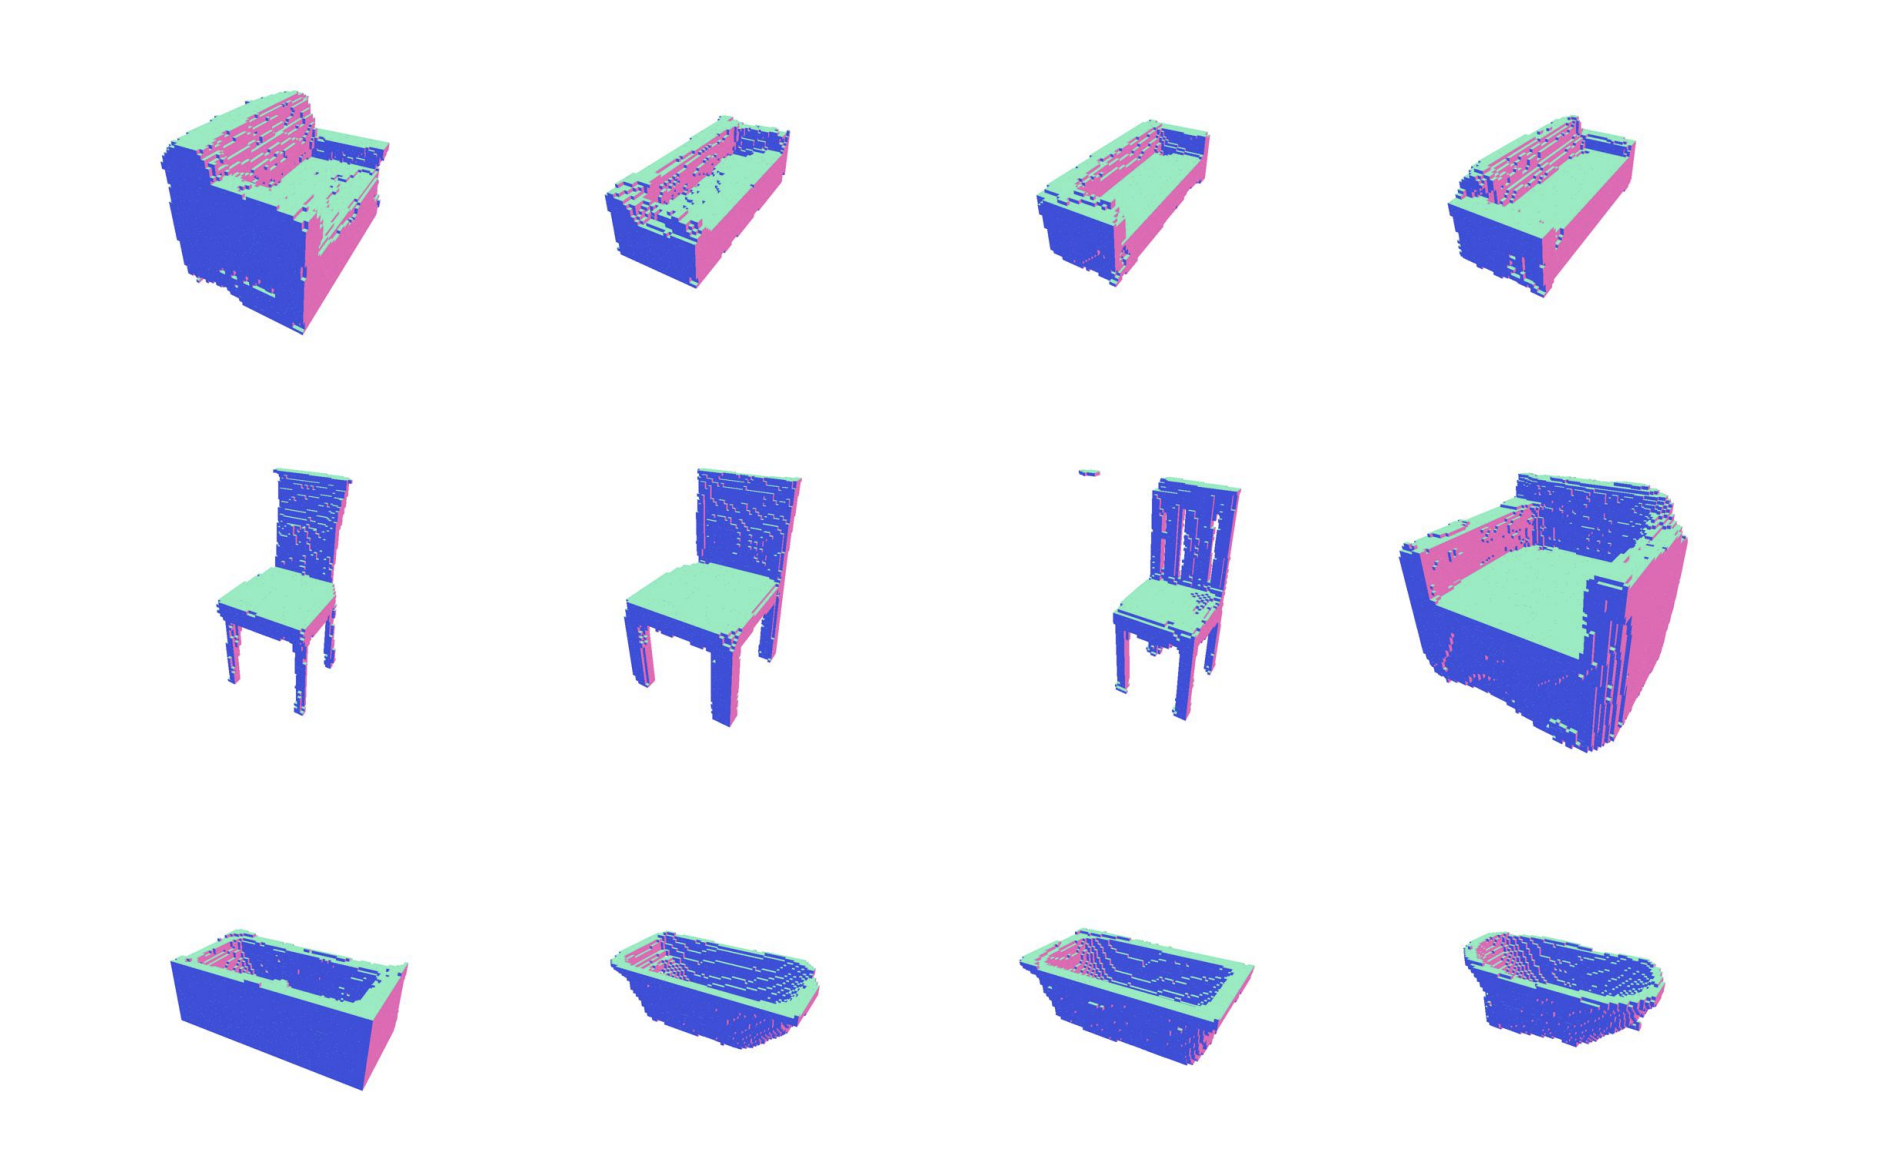 3D models of couches, chairs, and bath tubs generated by IG GAN technique. Cavities are modeled much better.